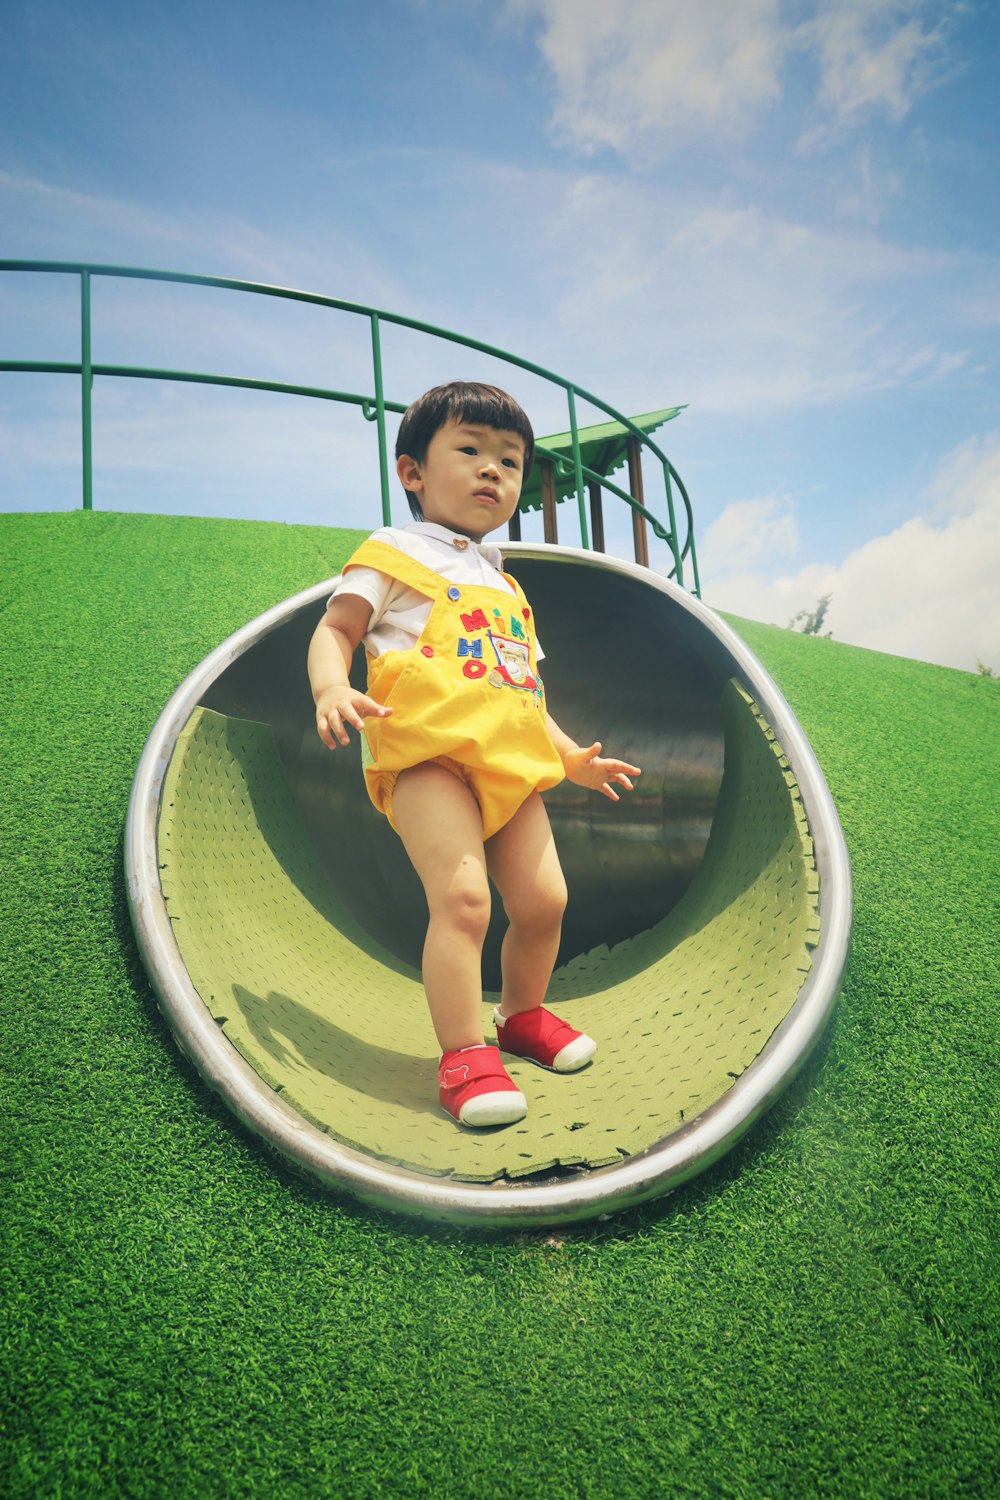 boy in yellow shirt and black shorts sitting on black round trampoline